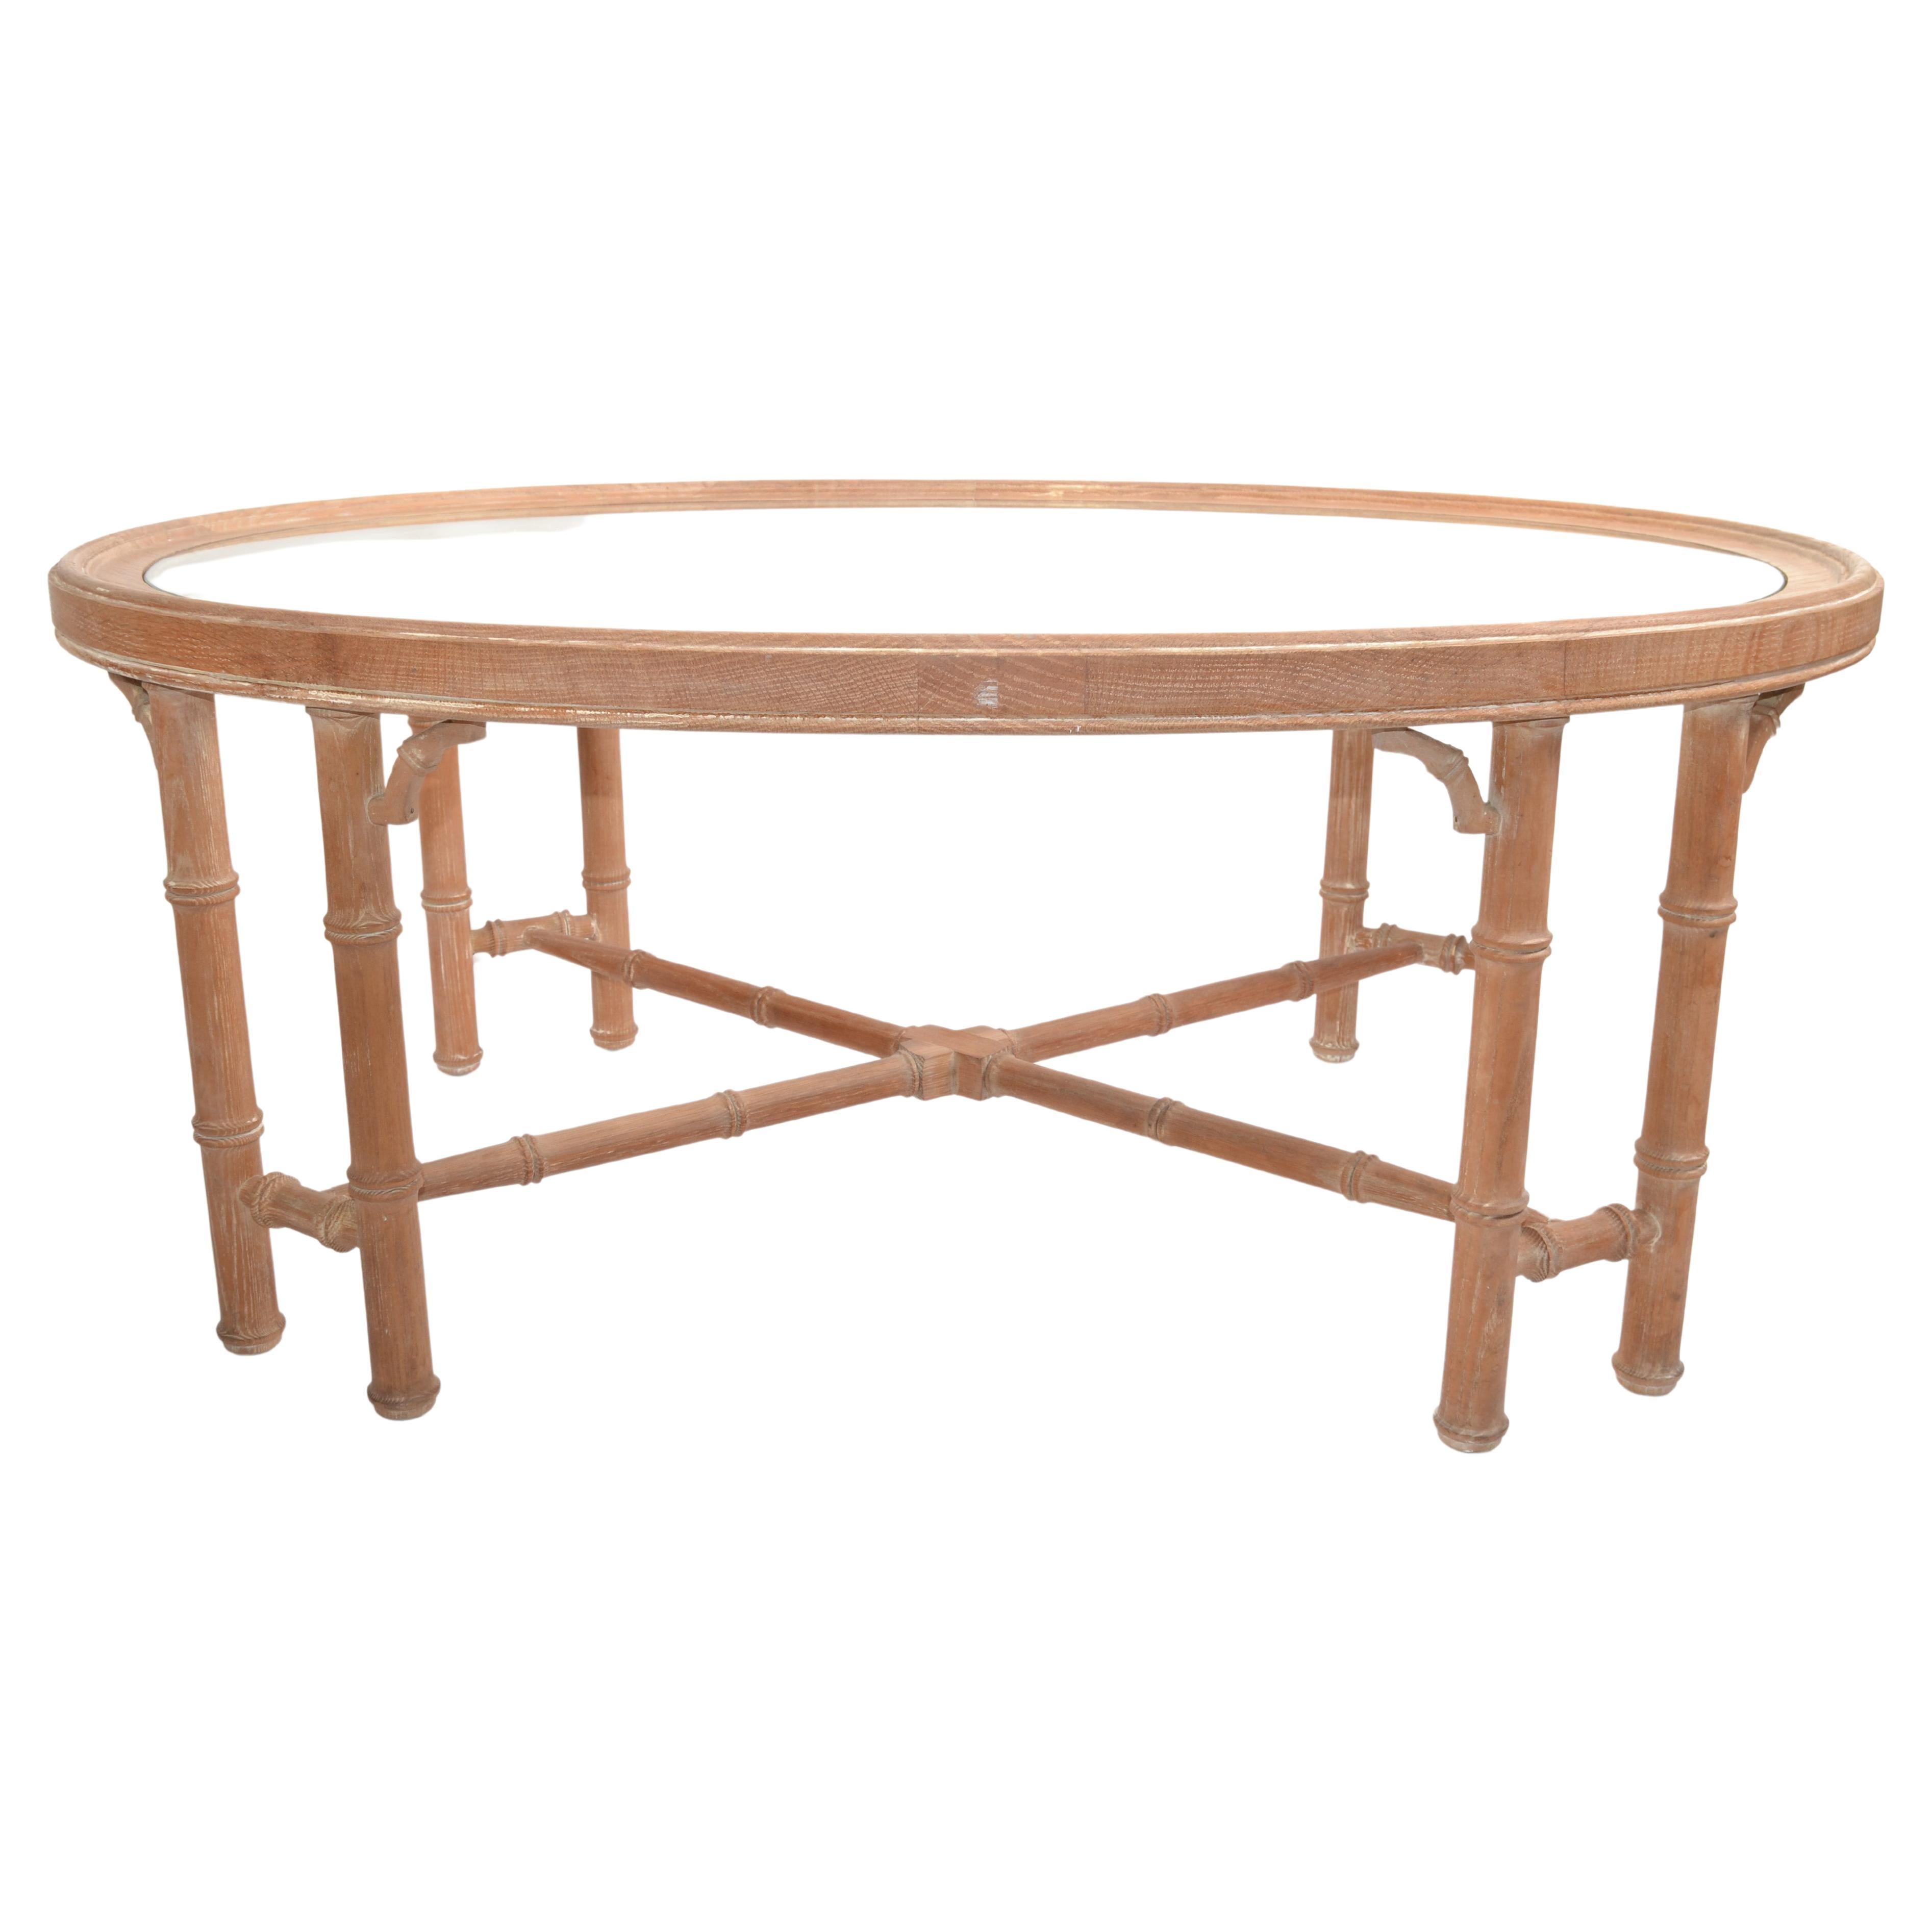 Mid-Century Modern oval white bleached oak wood coffee table with faux bamboo design and oval inserted Glass Top.
Glass measures: 25 x 39 inches.
Lovely 1970s chinoiserie inspired Asian Design Sofa Table which fits to many interior styles.
 